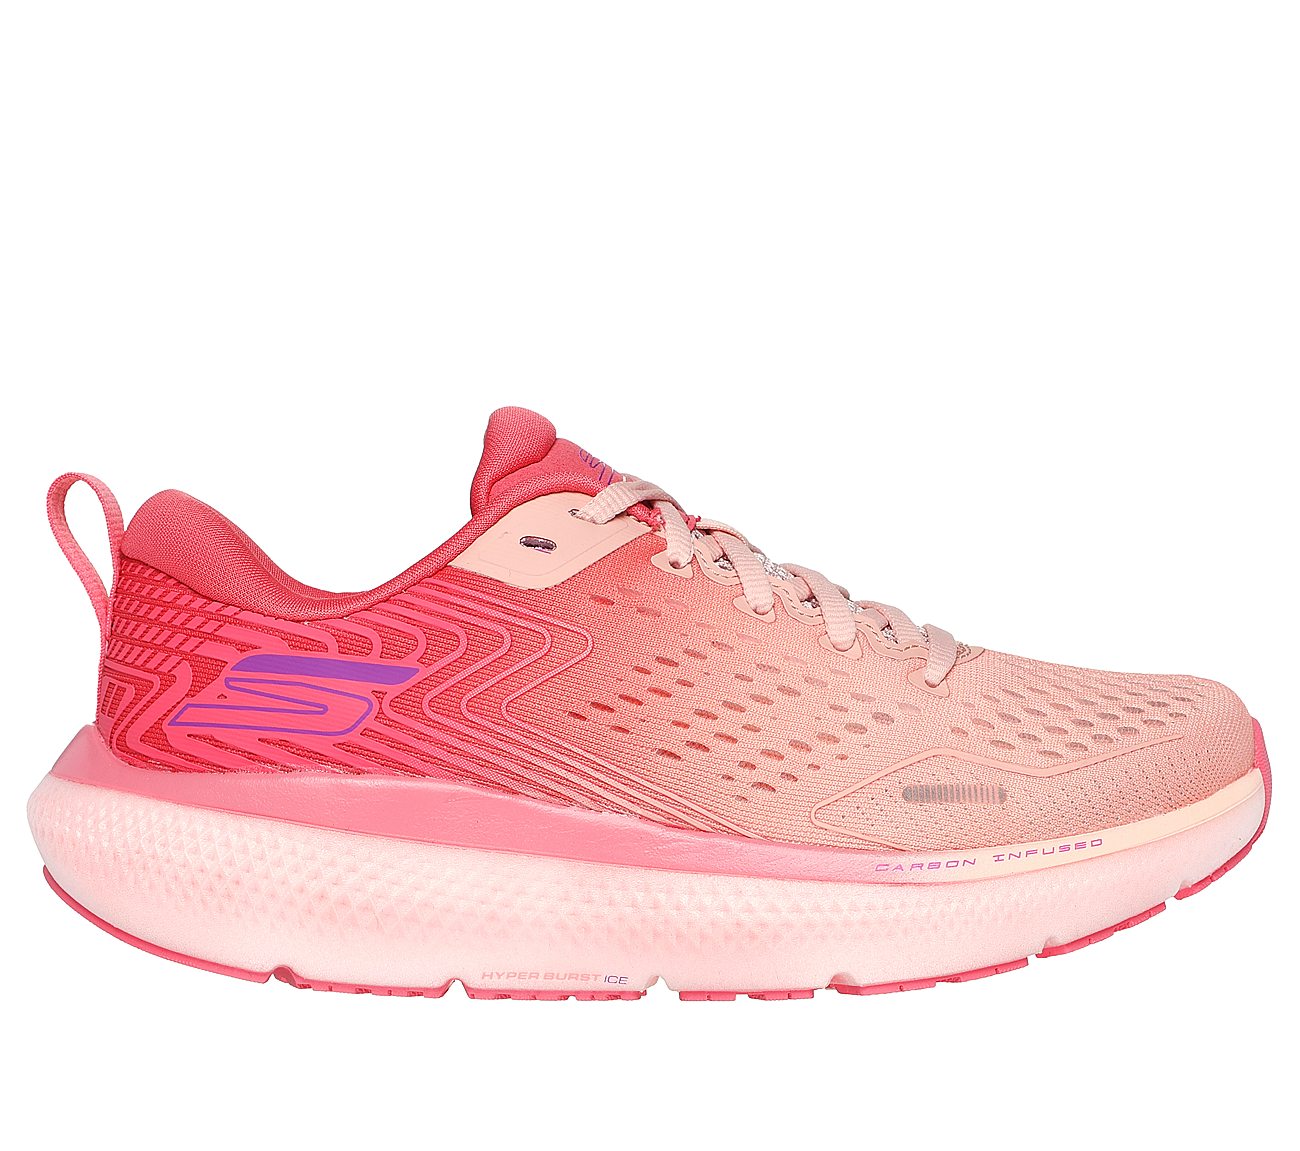 GO RUN RIDE 11, PINK Footwear Lateral View